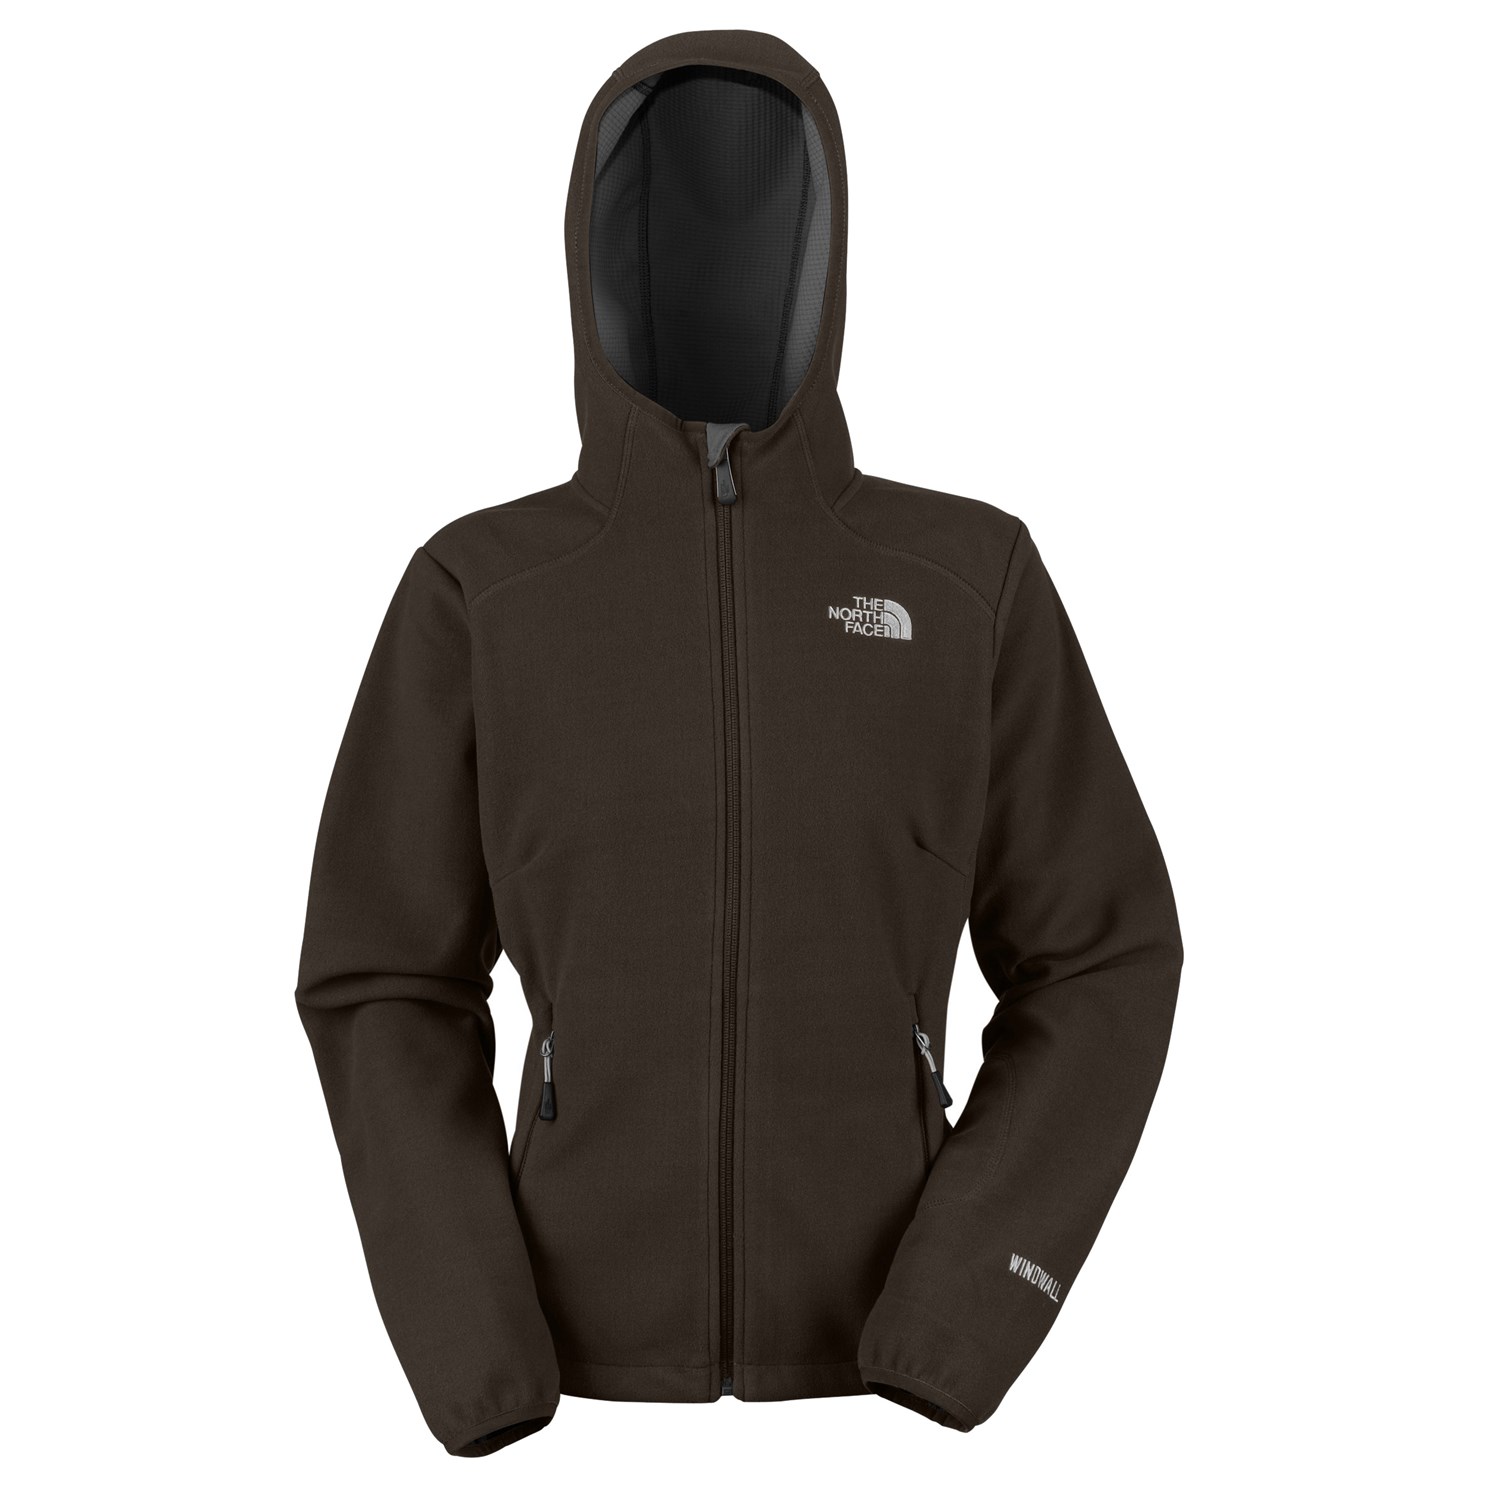 north face windwall